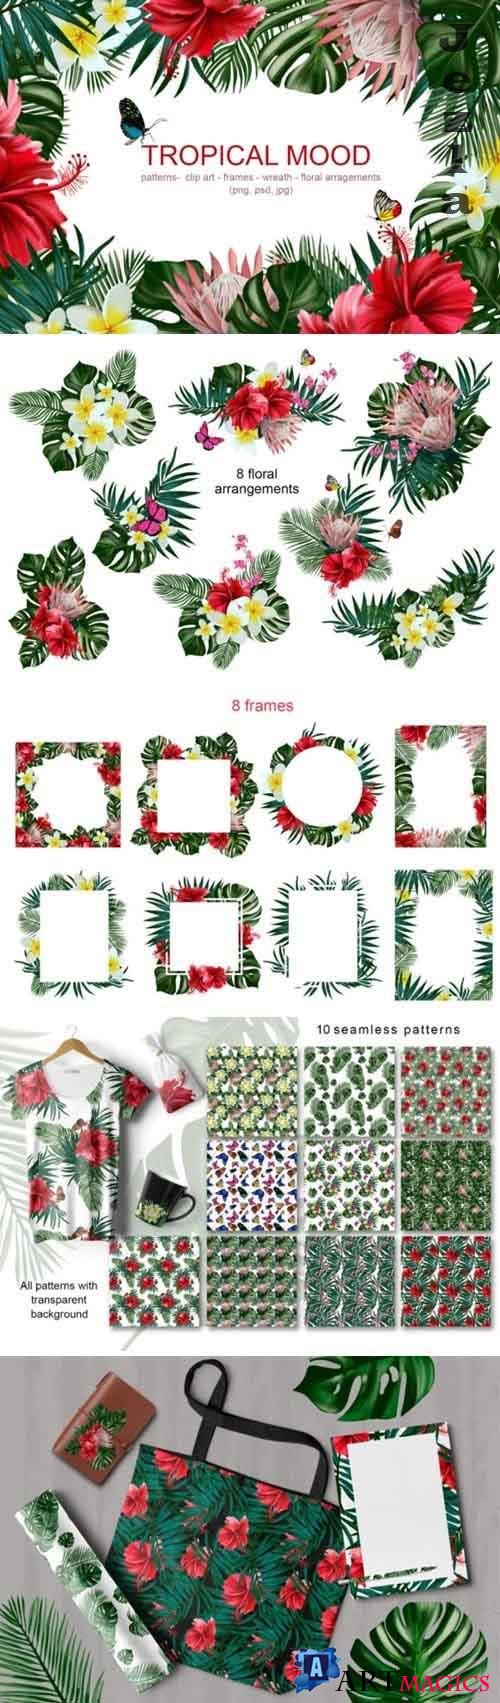 Tropical Mood - floral collection - 3050210